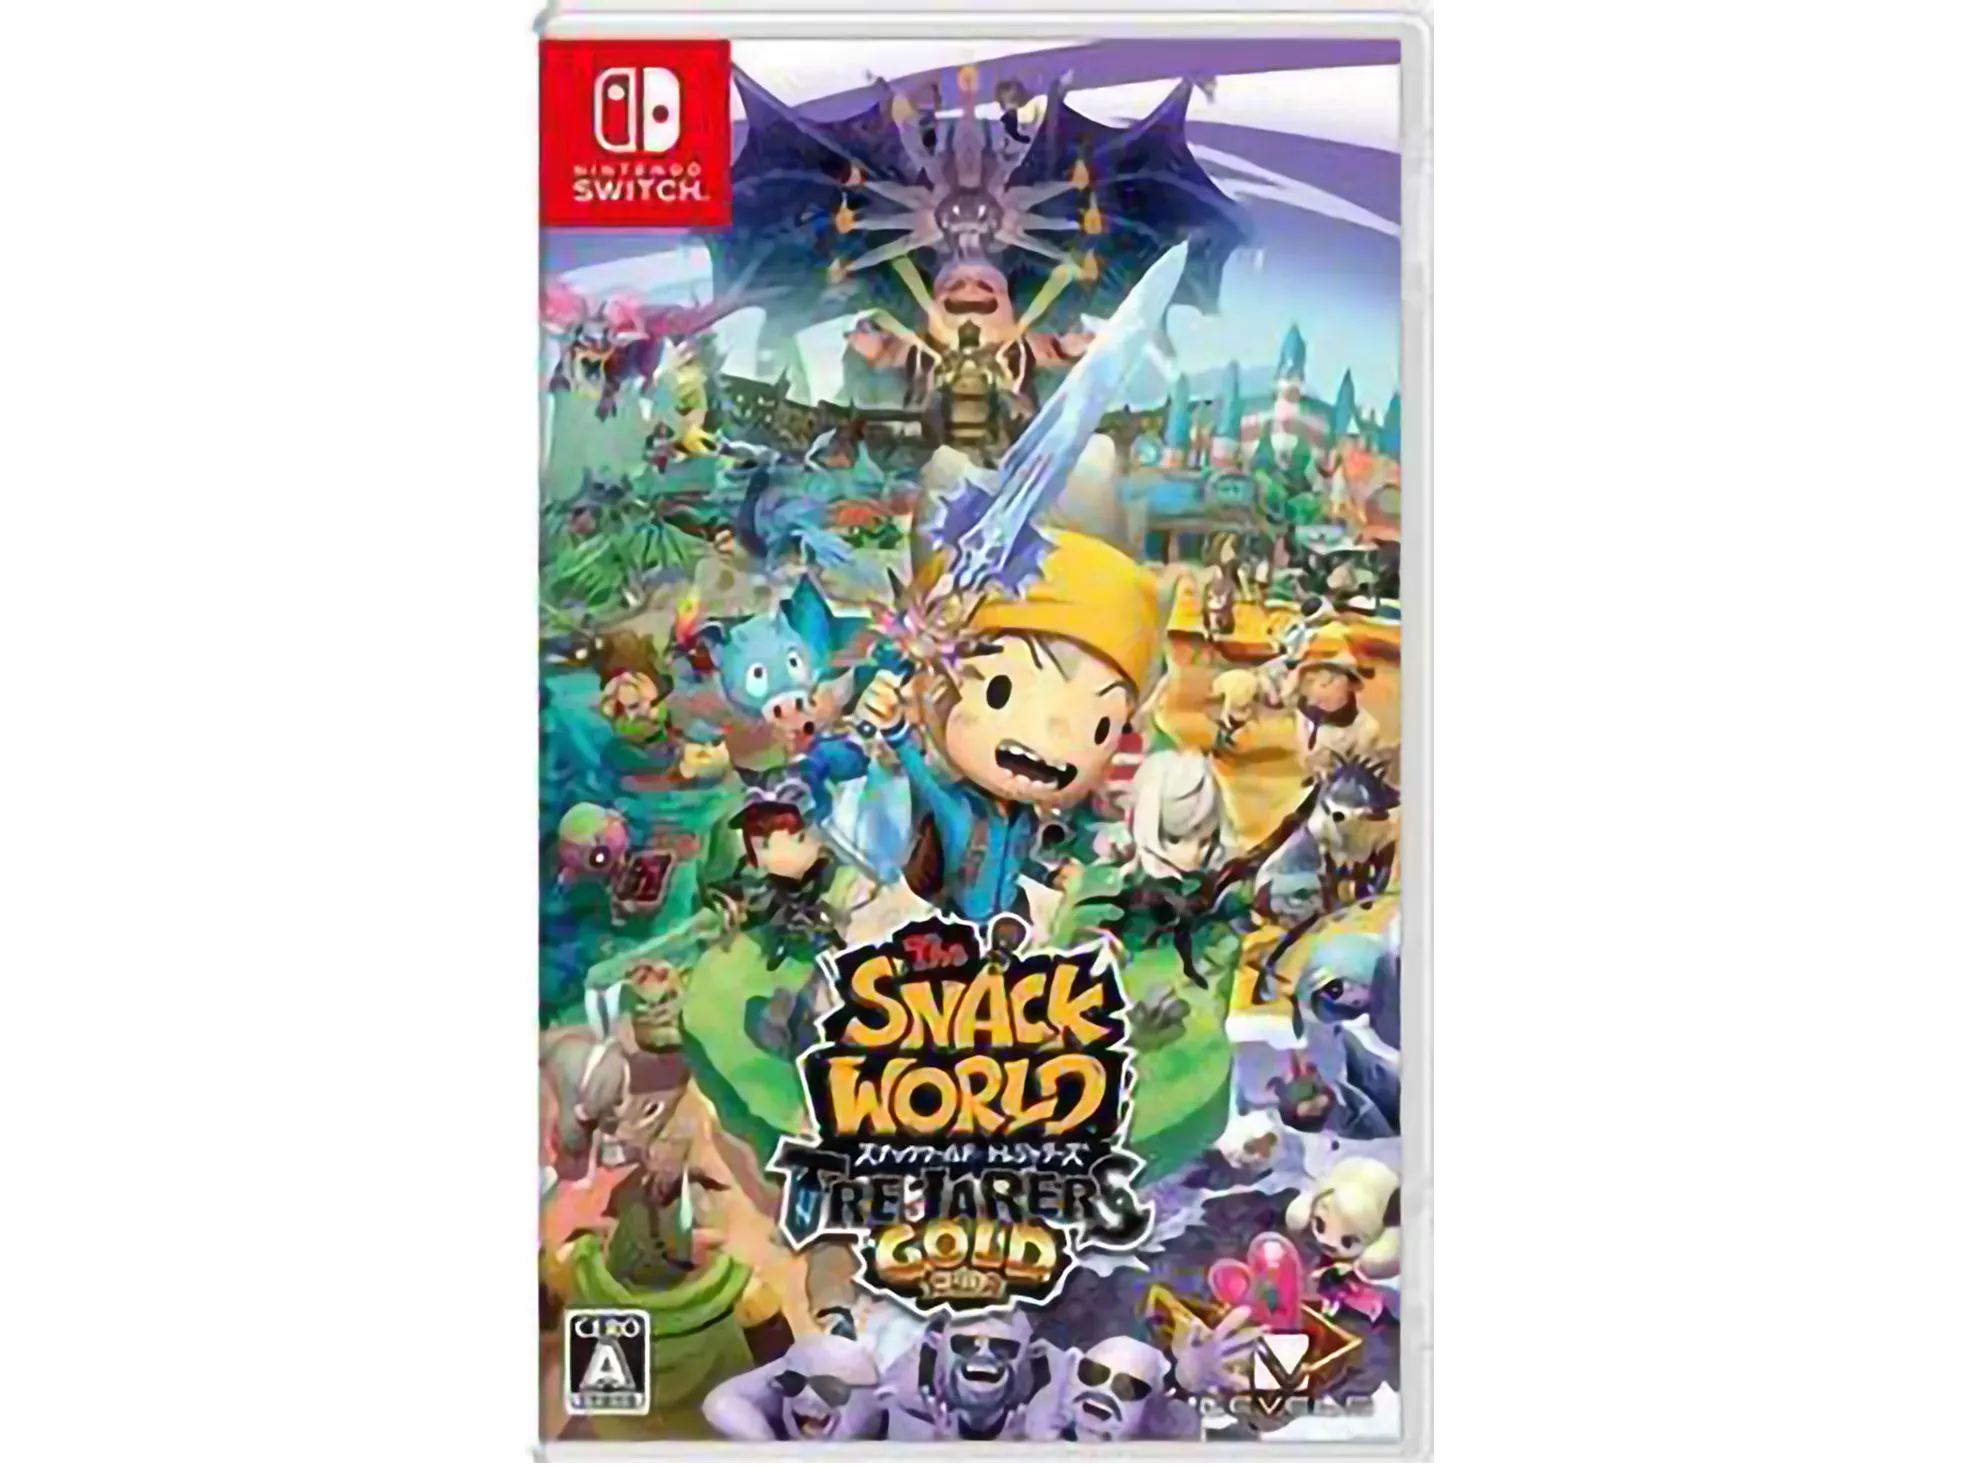 Snack World The Dungeon Crawl Gold Pre Owned